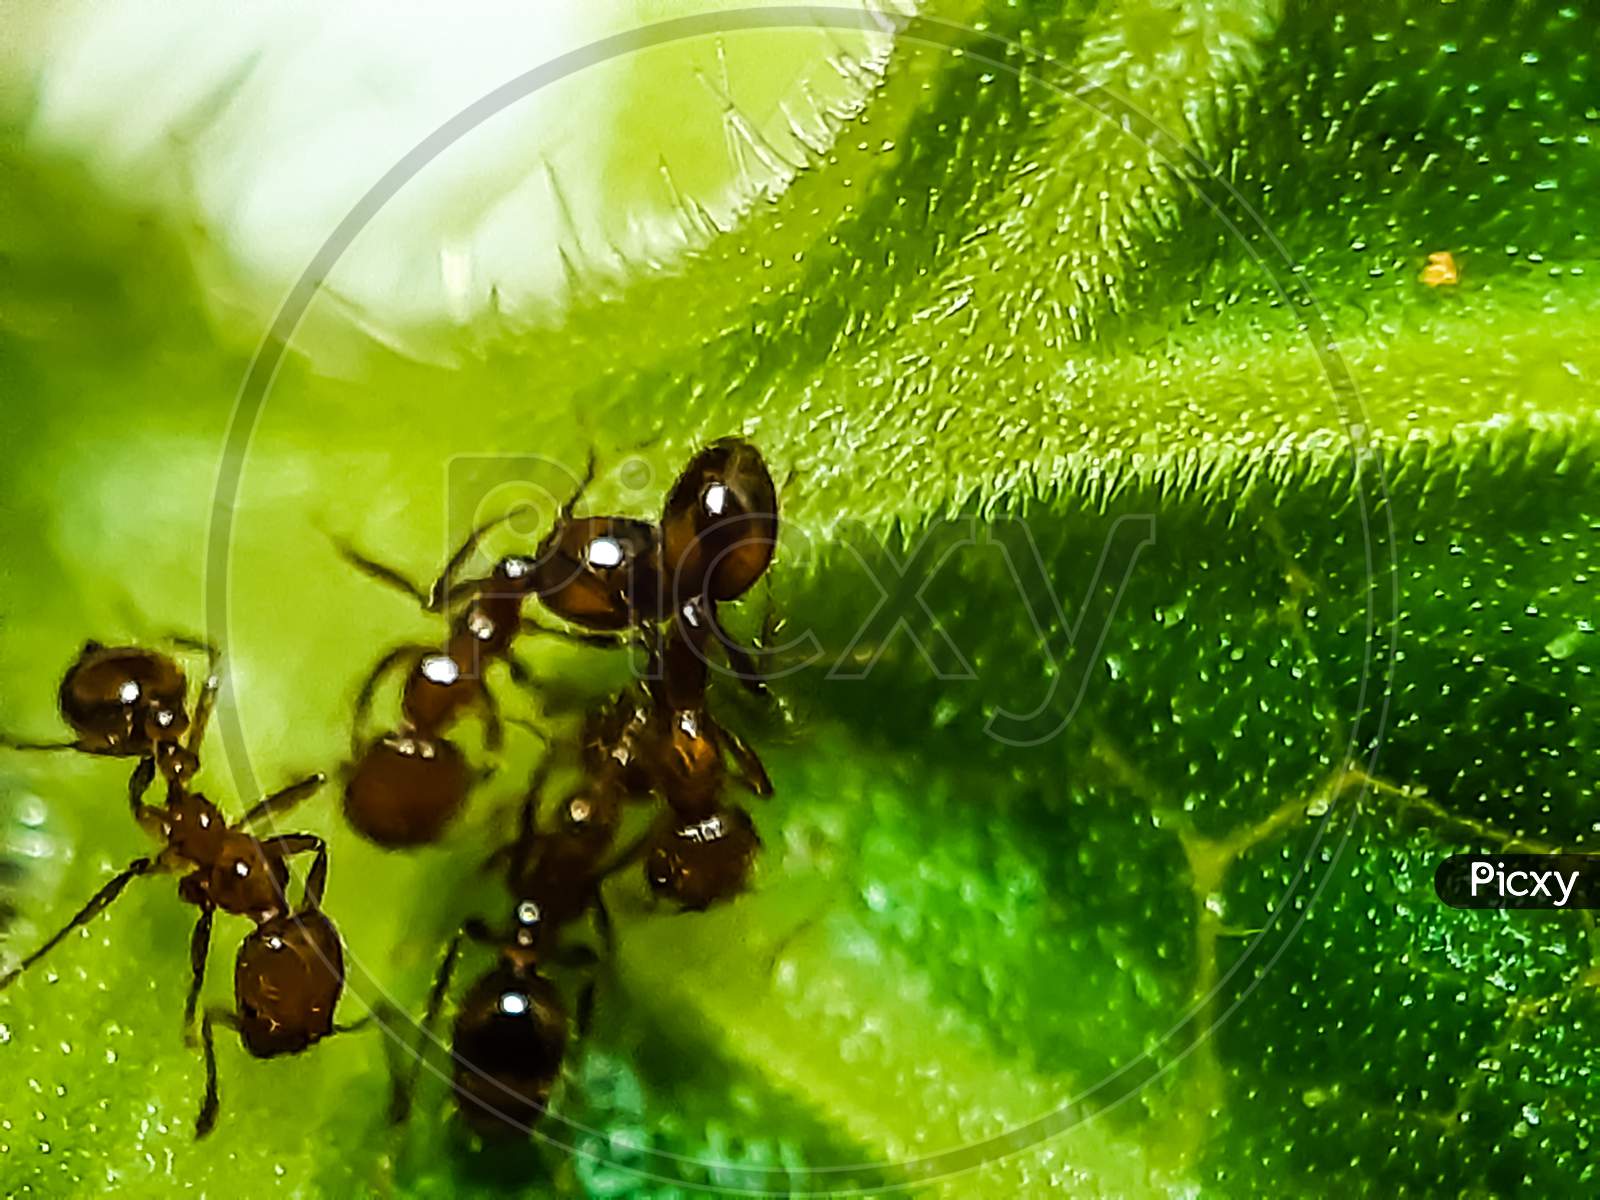 There Are Many Red Ant Sitting On The Green Leaves And The Sunlight Is Being Reflected